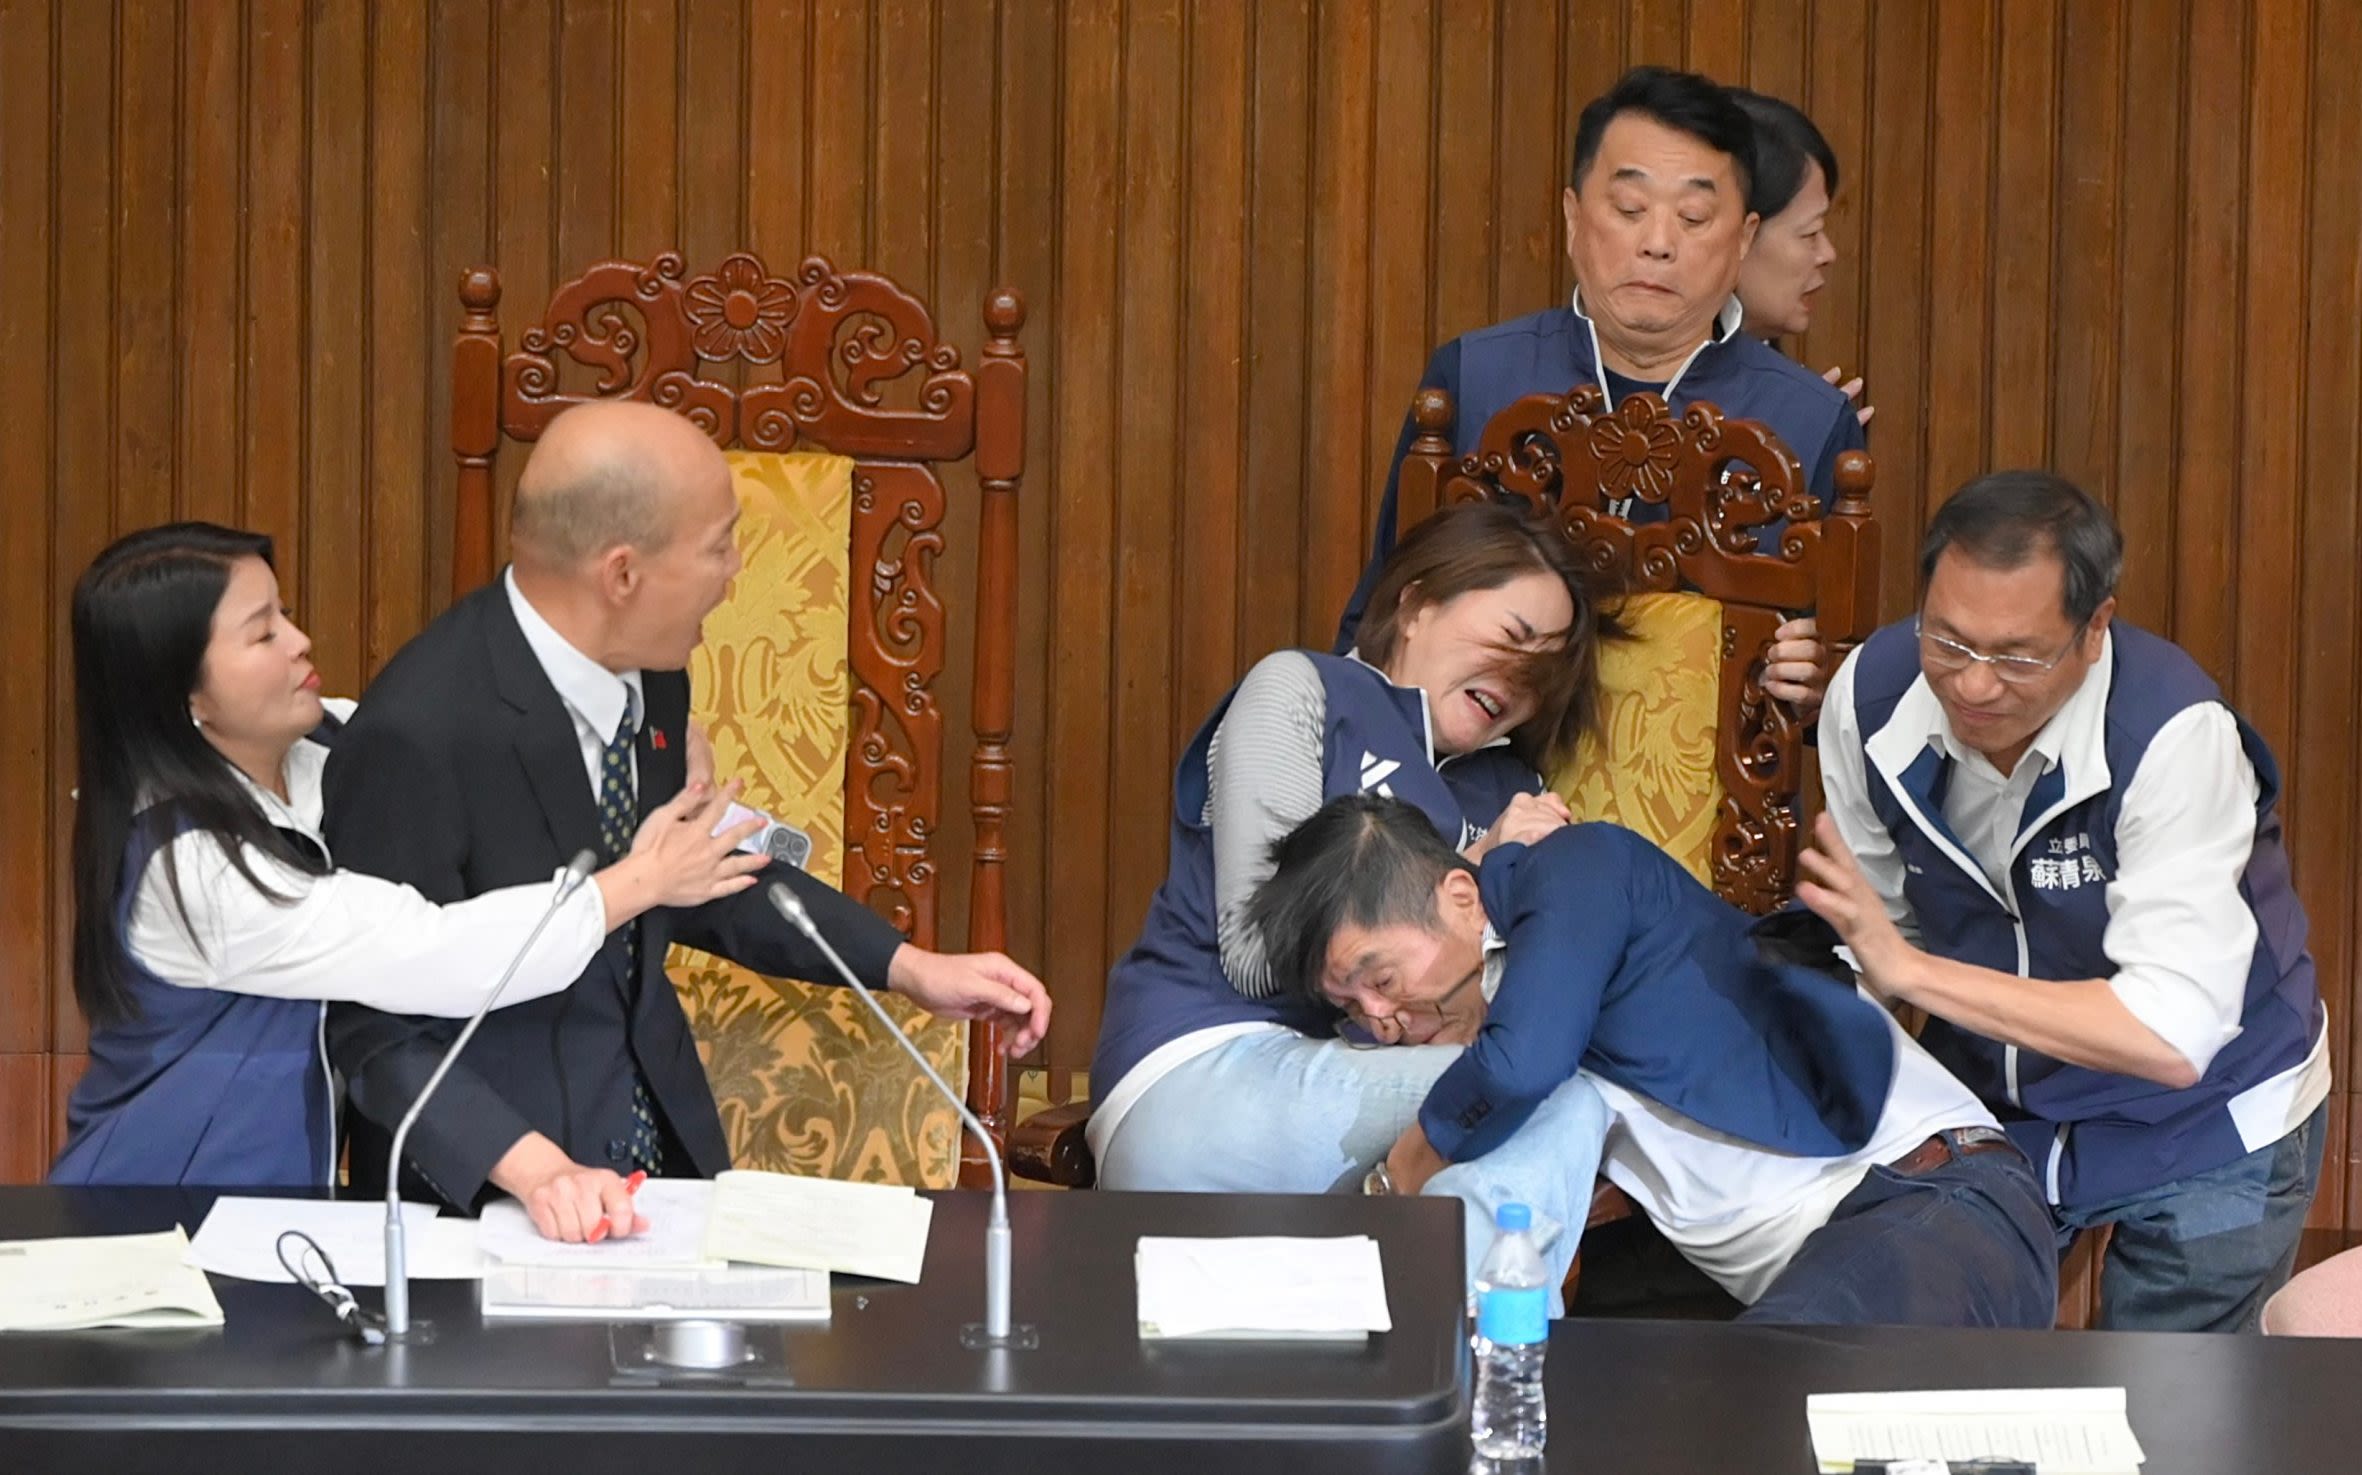 Violence breaks out in chaotic Taiwanese parliament